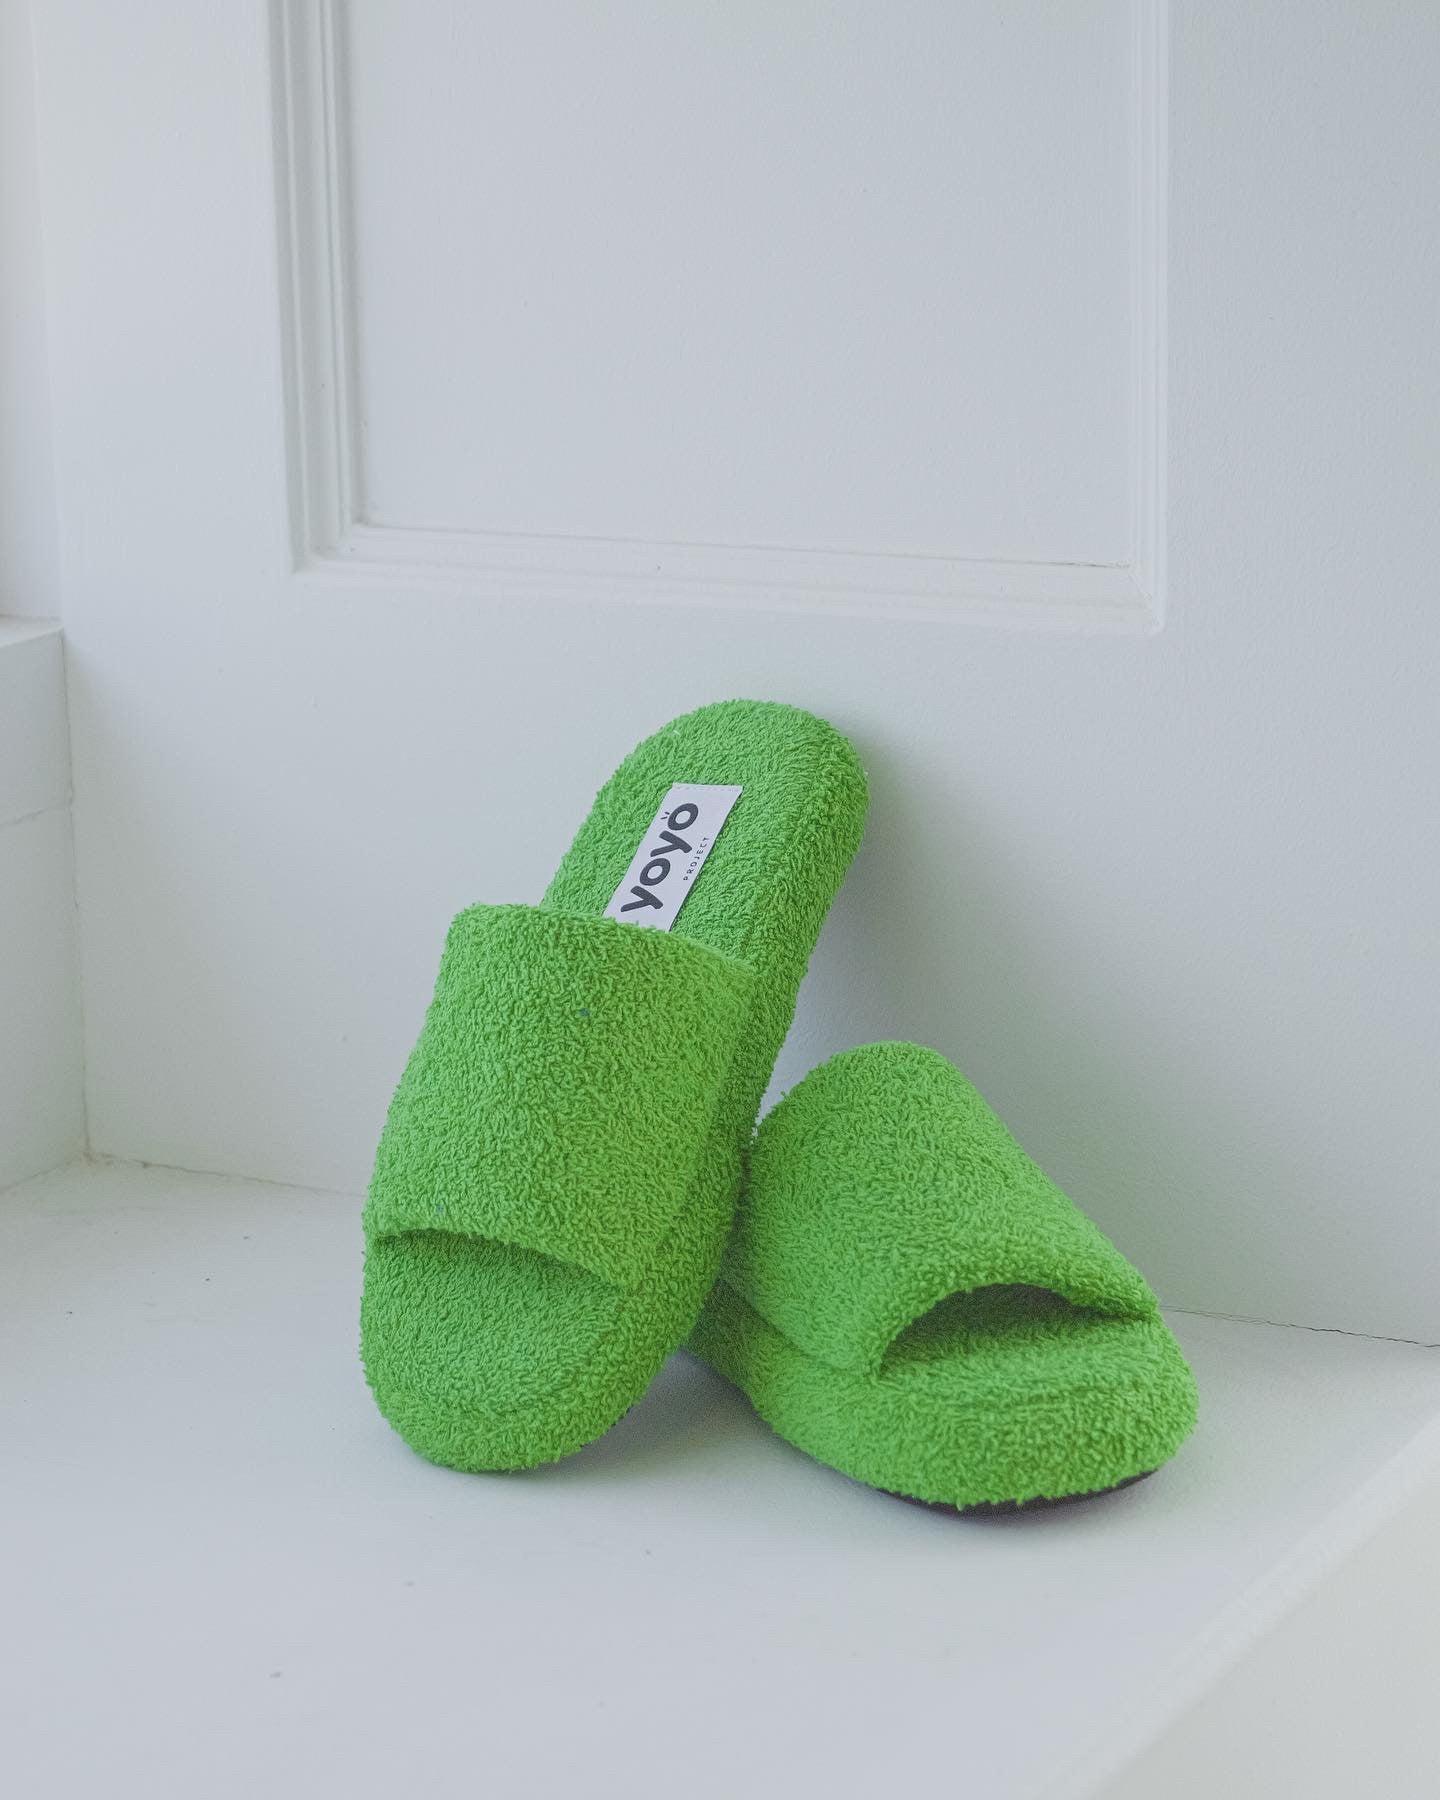 ROOM SHOES GREEN